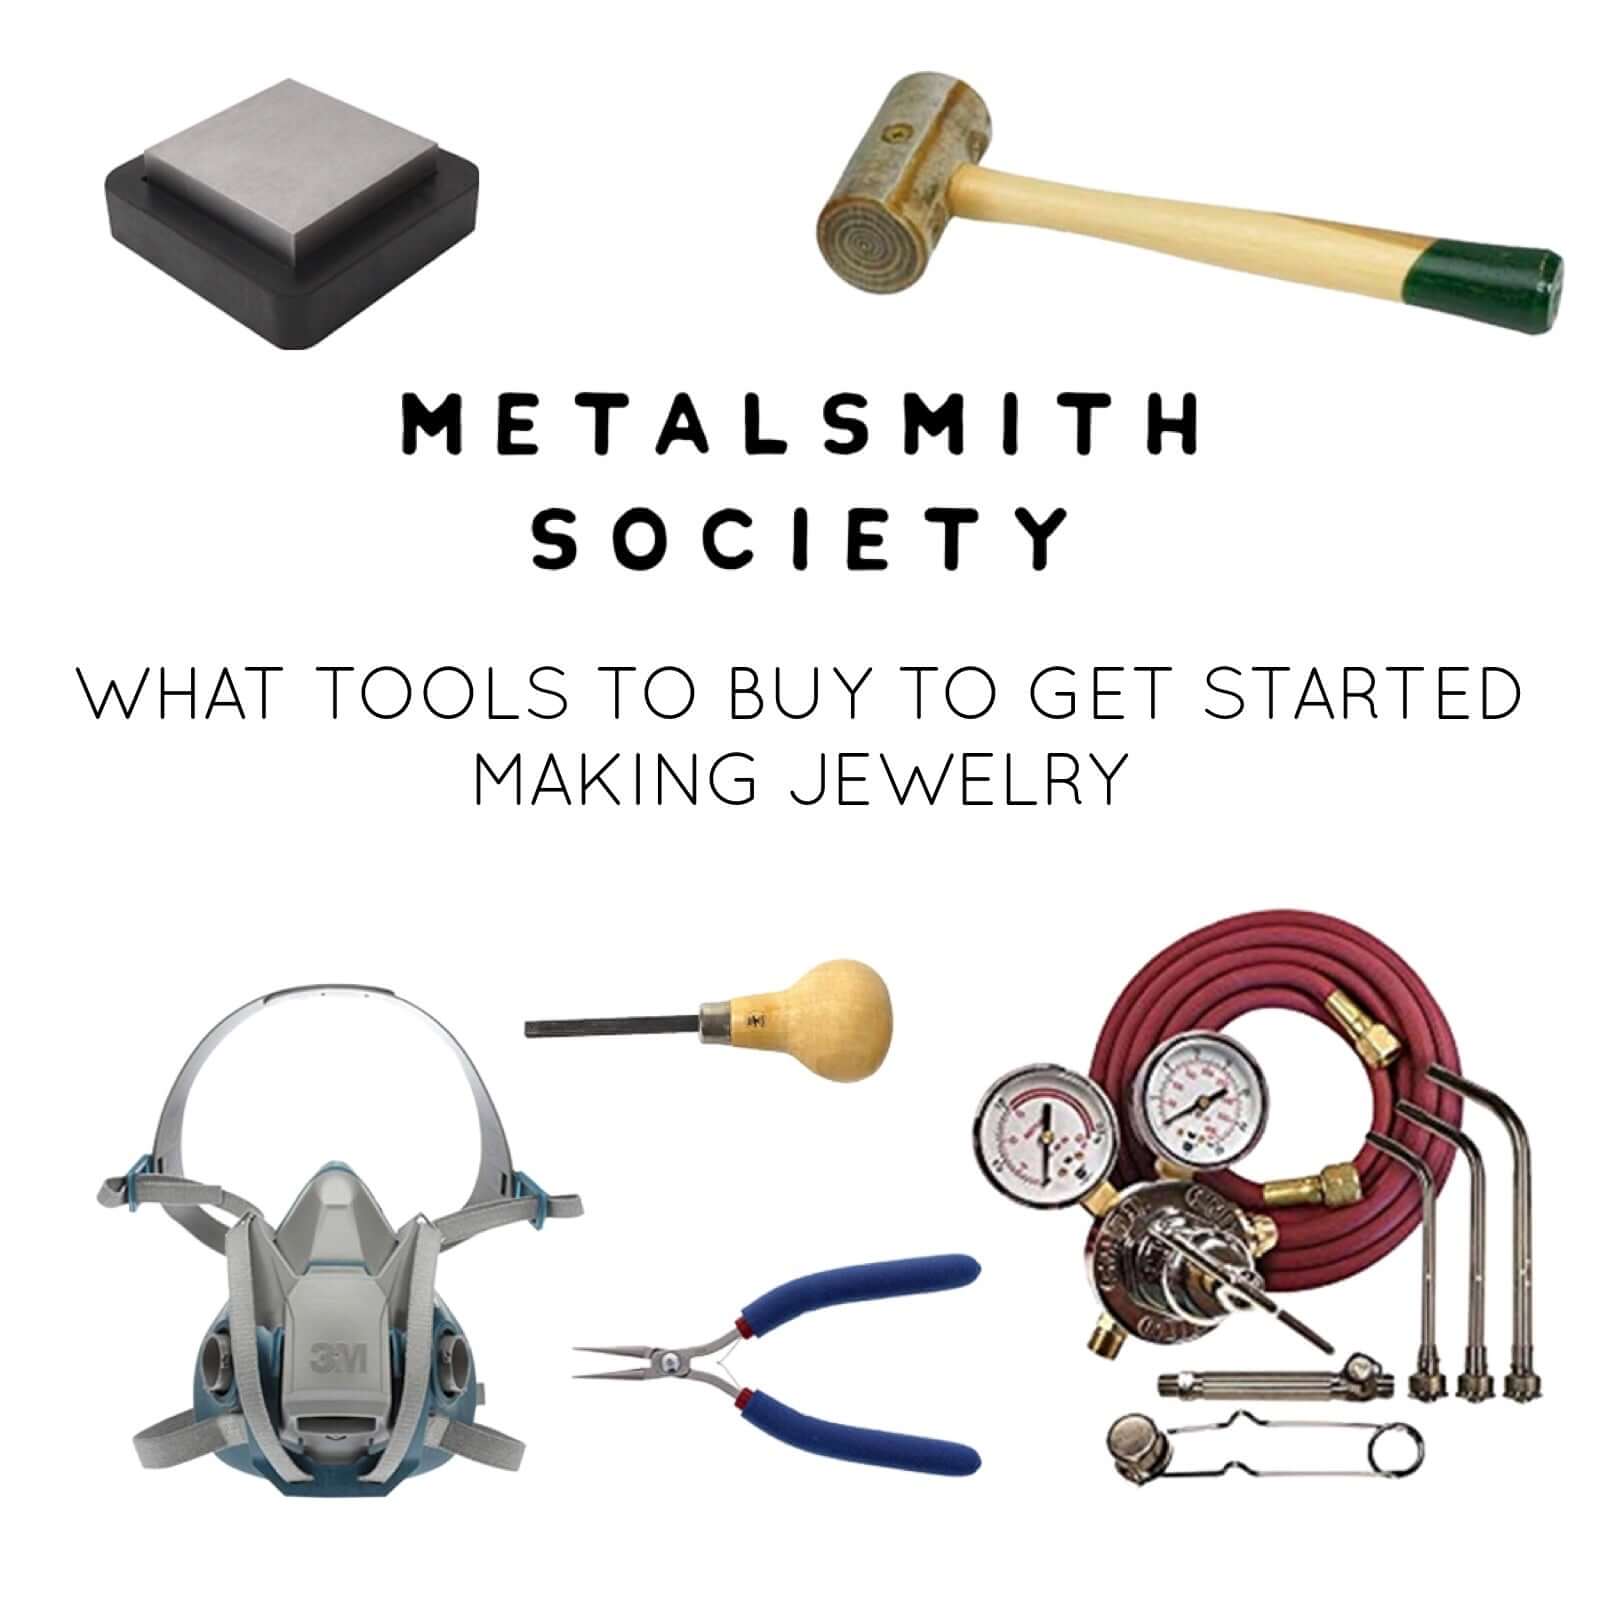 HOW TO USE A ROLLING MILL FOR JEWELRY MAKING – Metalsmith Society